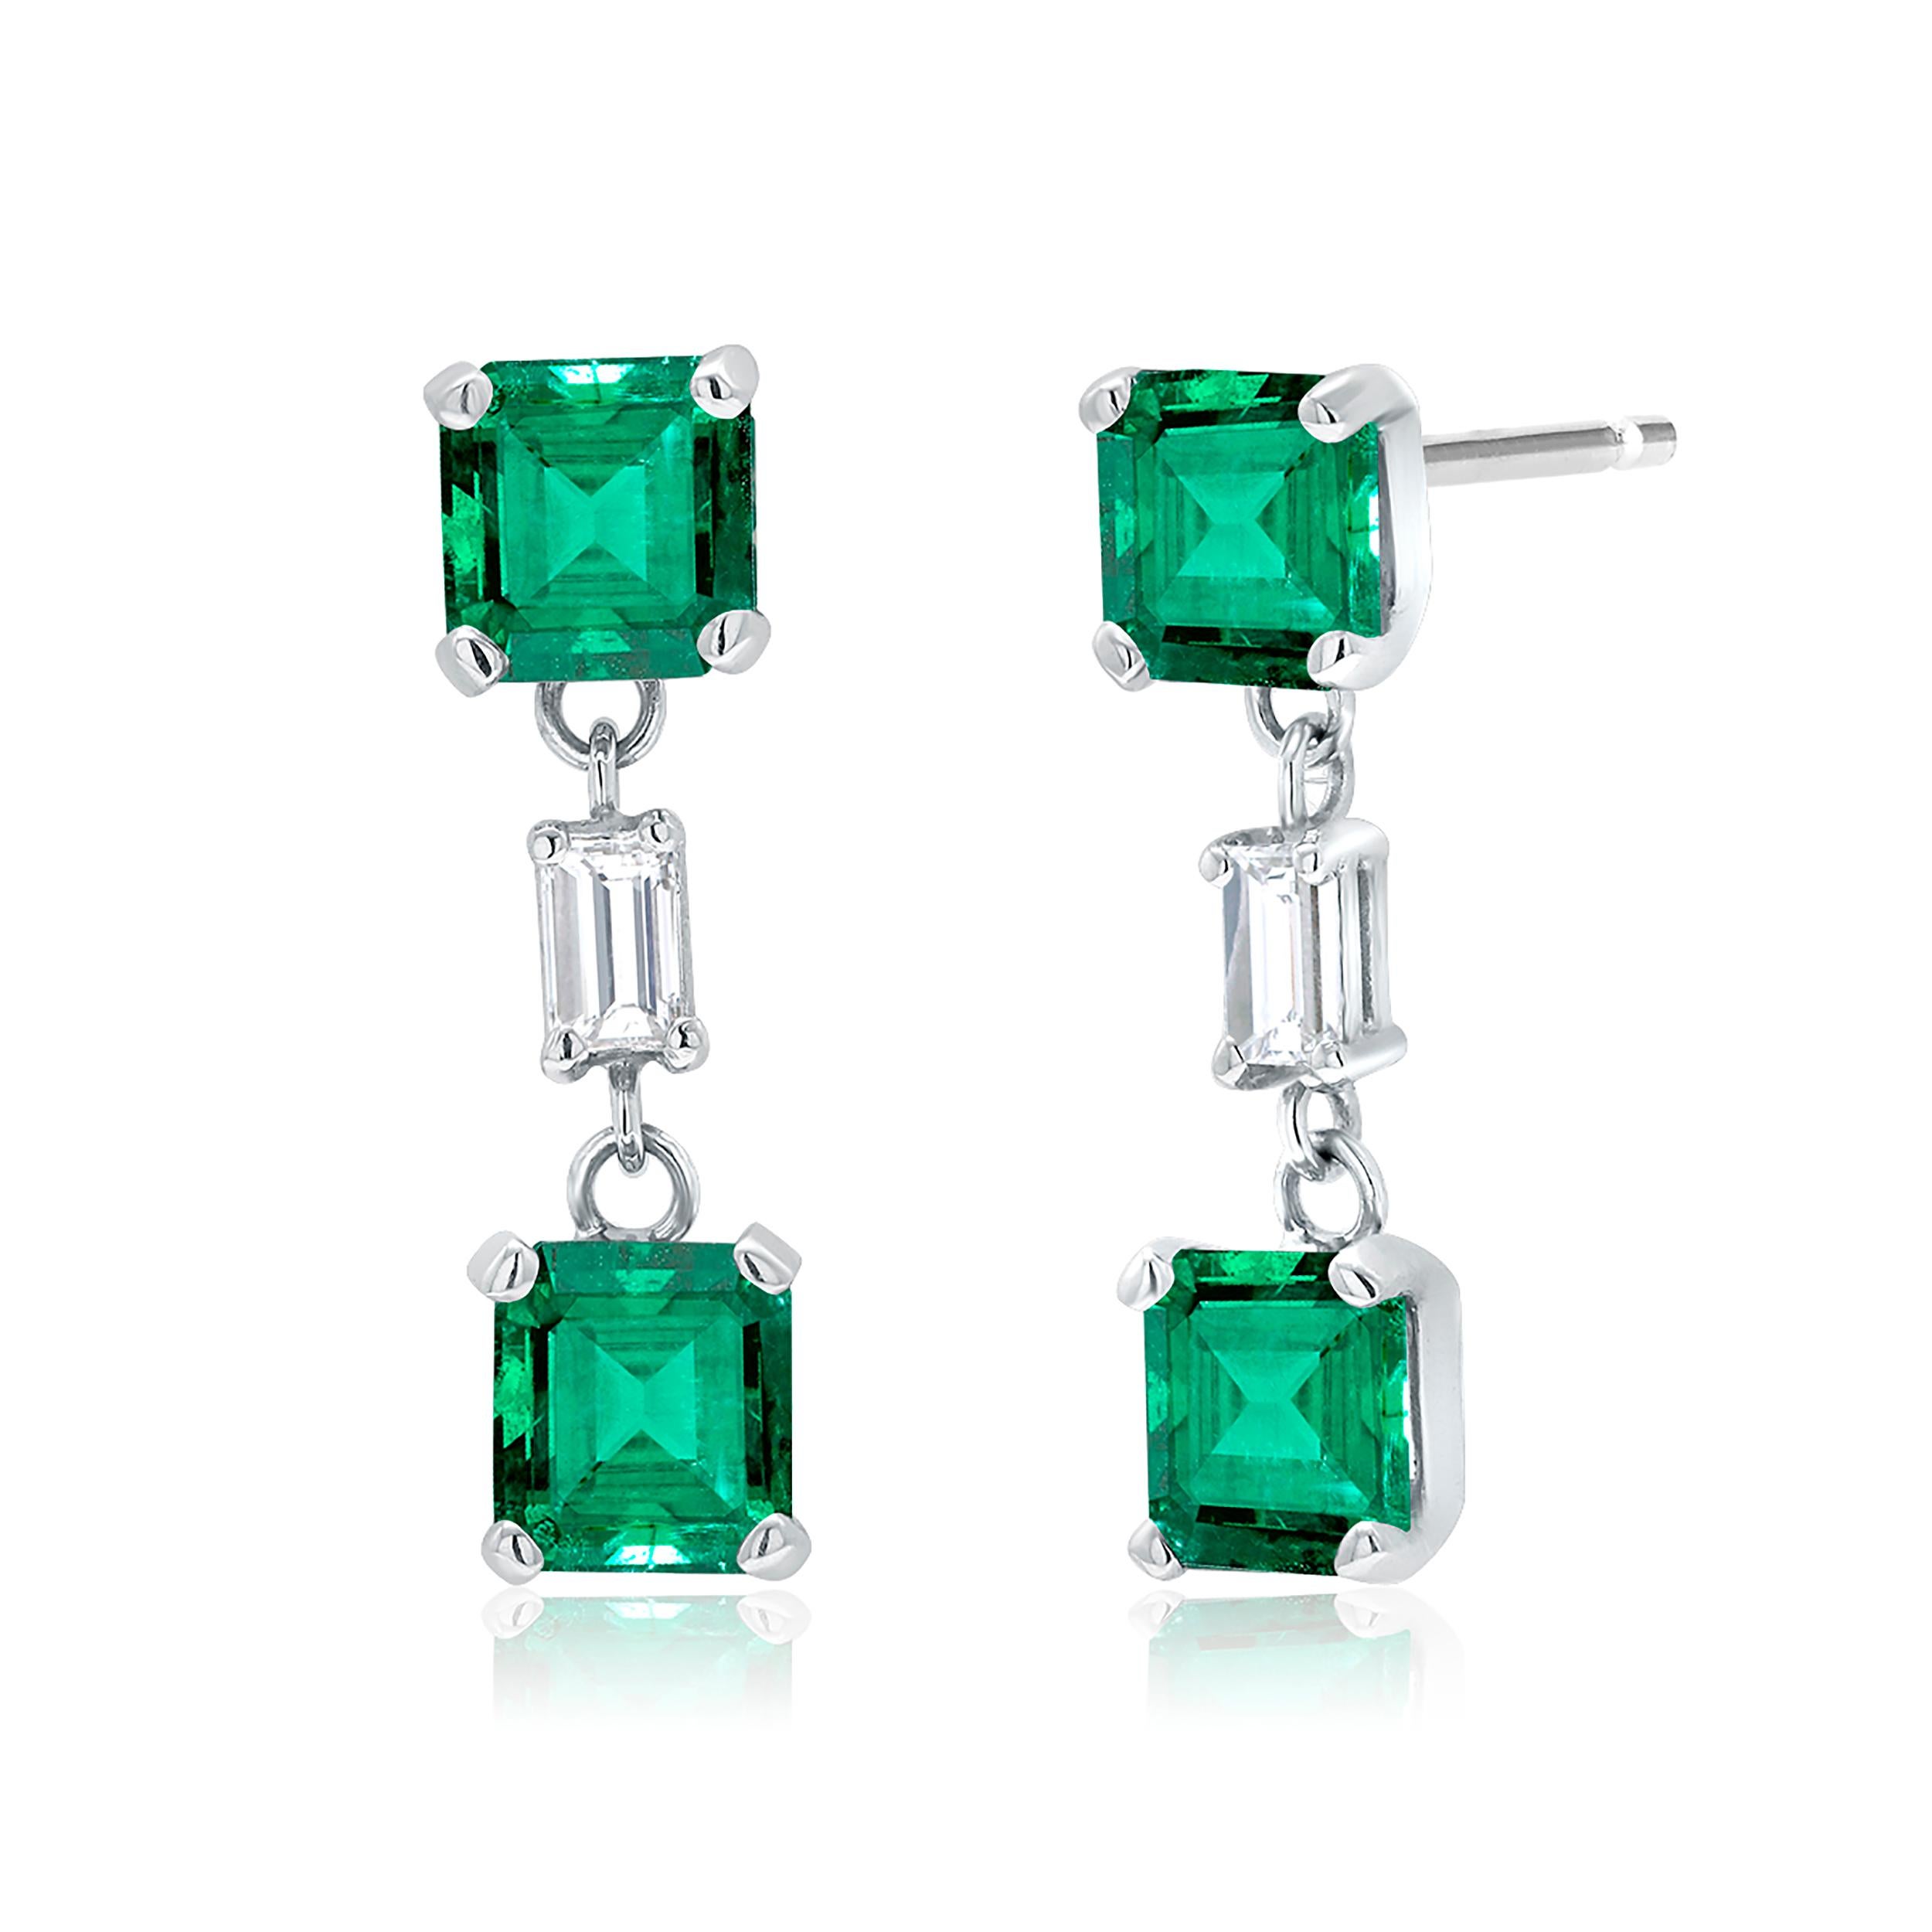 Contemporary Emerald and Diamond Drop Earrings Weighing 3.65 Carat